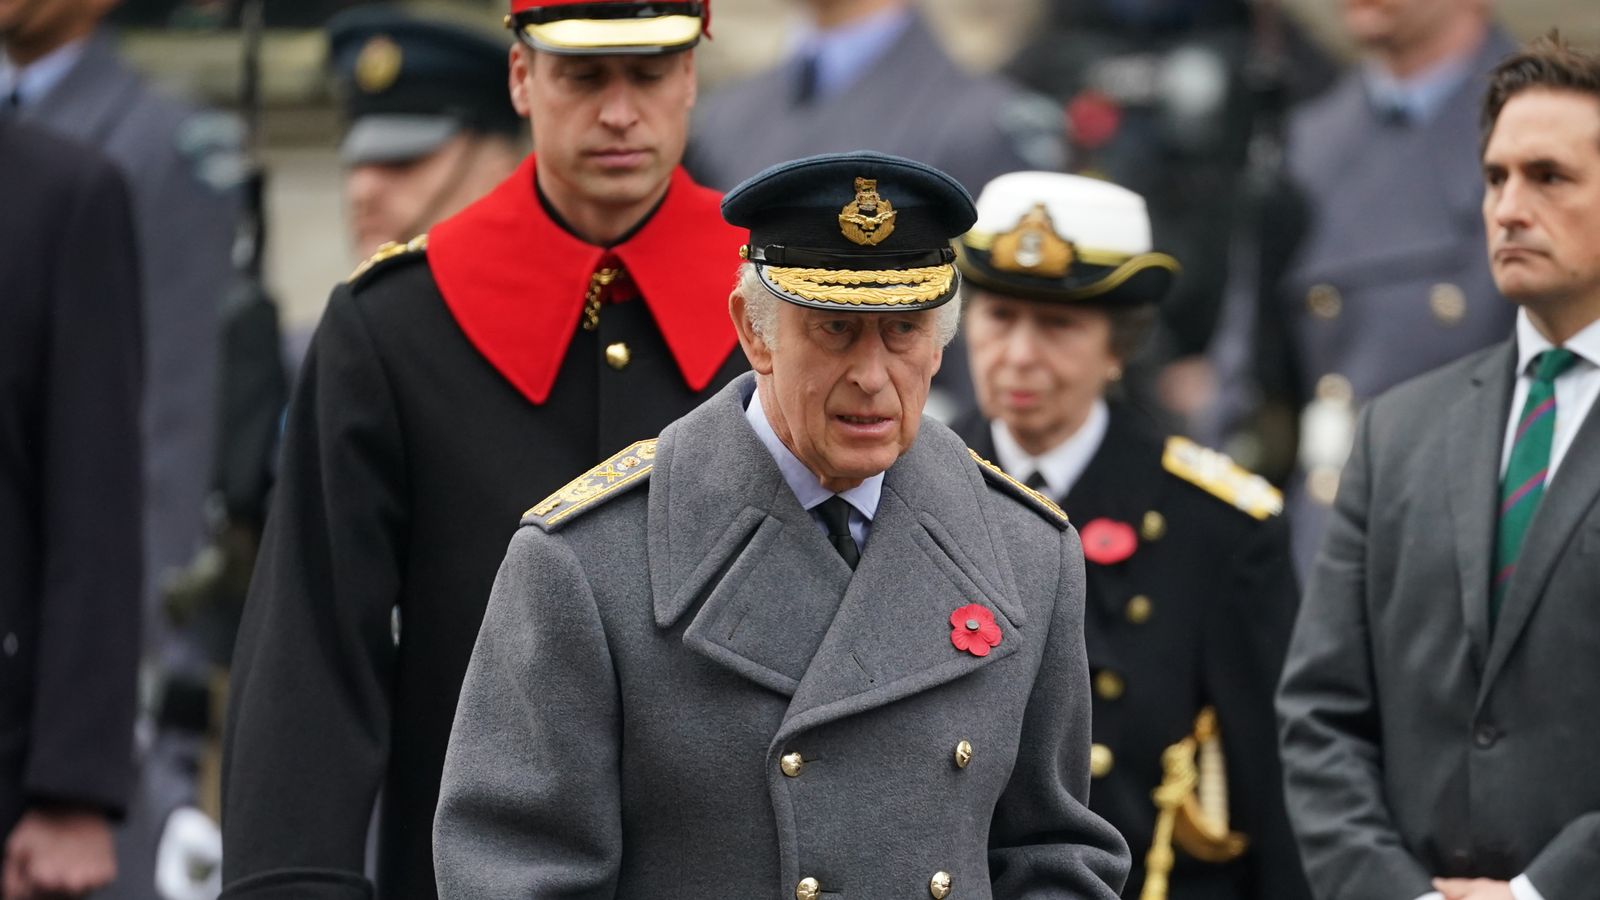 King leads Remembrance Day service at Cenotaph